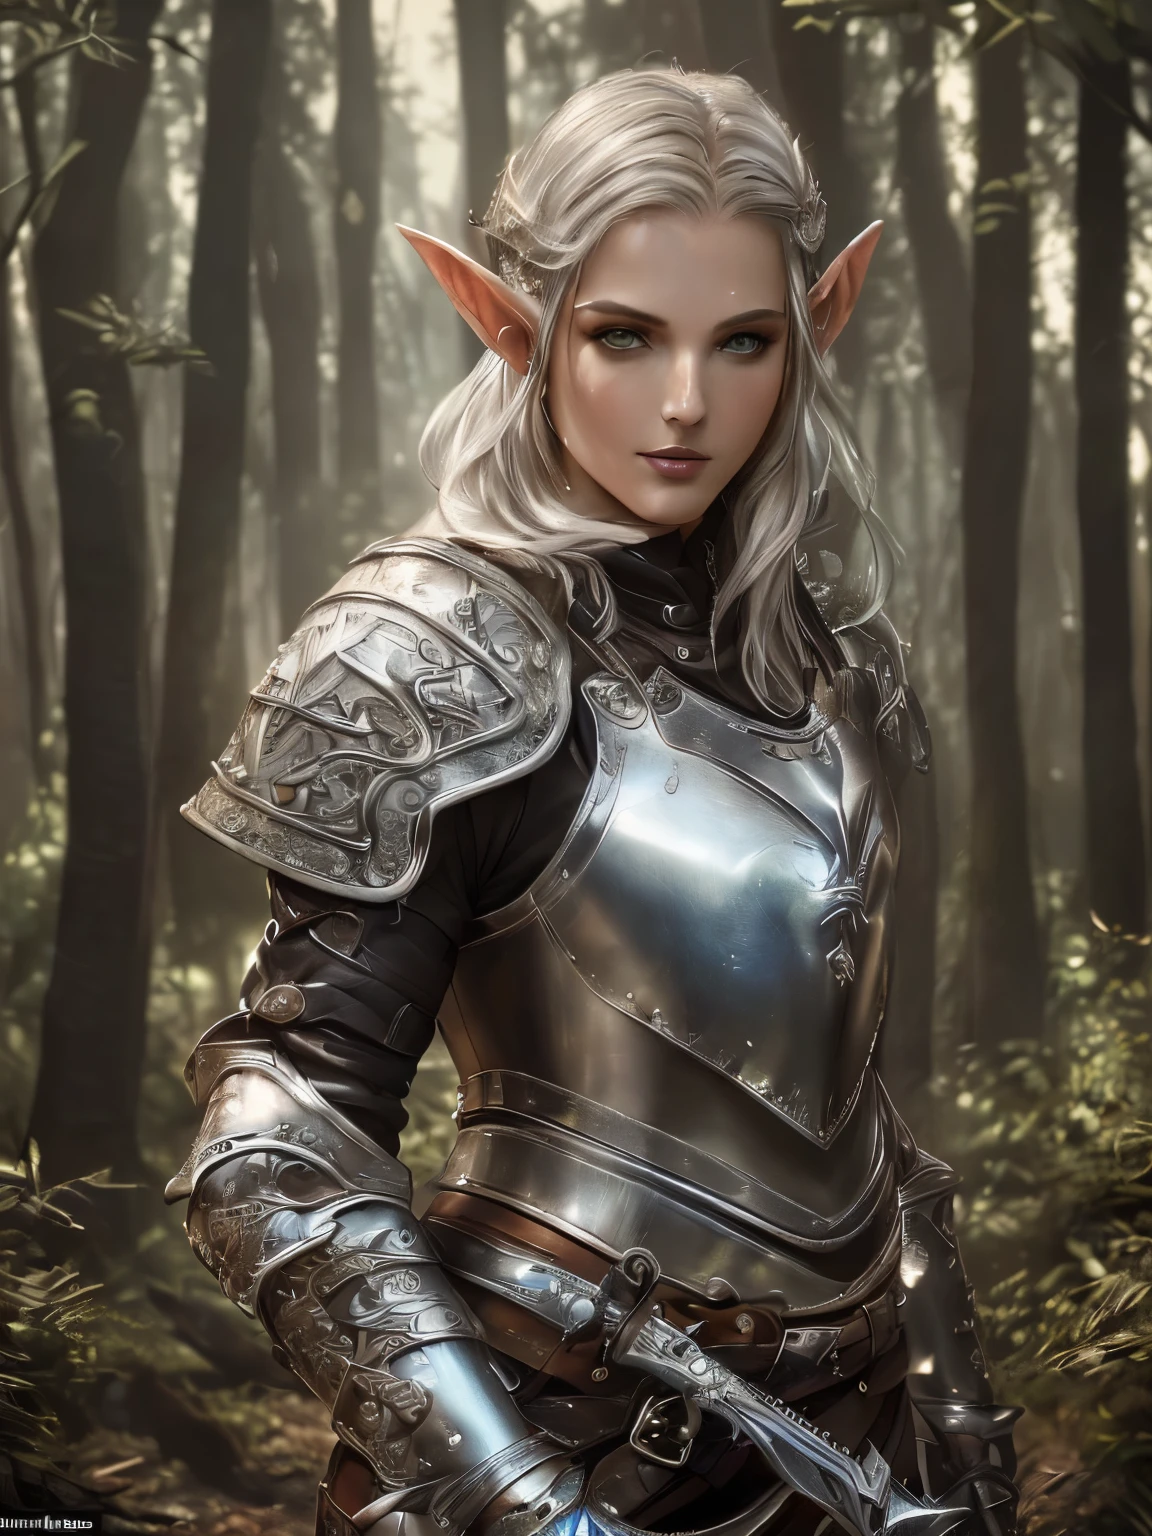 (Numerous award-winning masterpiece, with incredible detail, textures and maximum detail), (hyper realistic:1.4), (Full body image:1.8),((fantasy world)), (Beautiful elf female hunter:1.8),(languid and bewitching smile on the lips:1.5)(Seductive Gaze:1.9), best quality real texture skin, (bewitching finely Detailed and beautiful face:1.6),(Wearing a hunter leather armor set:1.99)(Image of aesthetic and decadent atmosphere:1.9), (fair but beautiful skin and face:1.8), (wearing many decadent and delicately crafted accessories:1.8),(Two eyes that emit strong green light from inside:1.4), ((dramatic photo)), ((cinematic light)),(dramatic pose), (smoke effects and bewitching light:1.4), (beautiful silver hair, Wind Effects:1.6), (Ruins of an old castle:1.7), (forest:1.6), pic realistic, faded, ((neutral colors)), art, (hdr:1.5), (muted colors:1.2), hyper detailed, (art station:1.5), cinematic, warm lights, light effect, dramatic light, (intricate details:1.1), complex background,